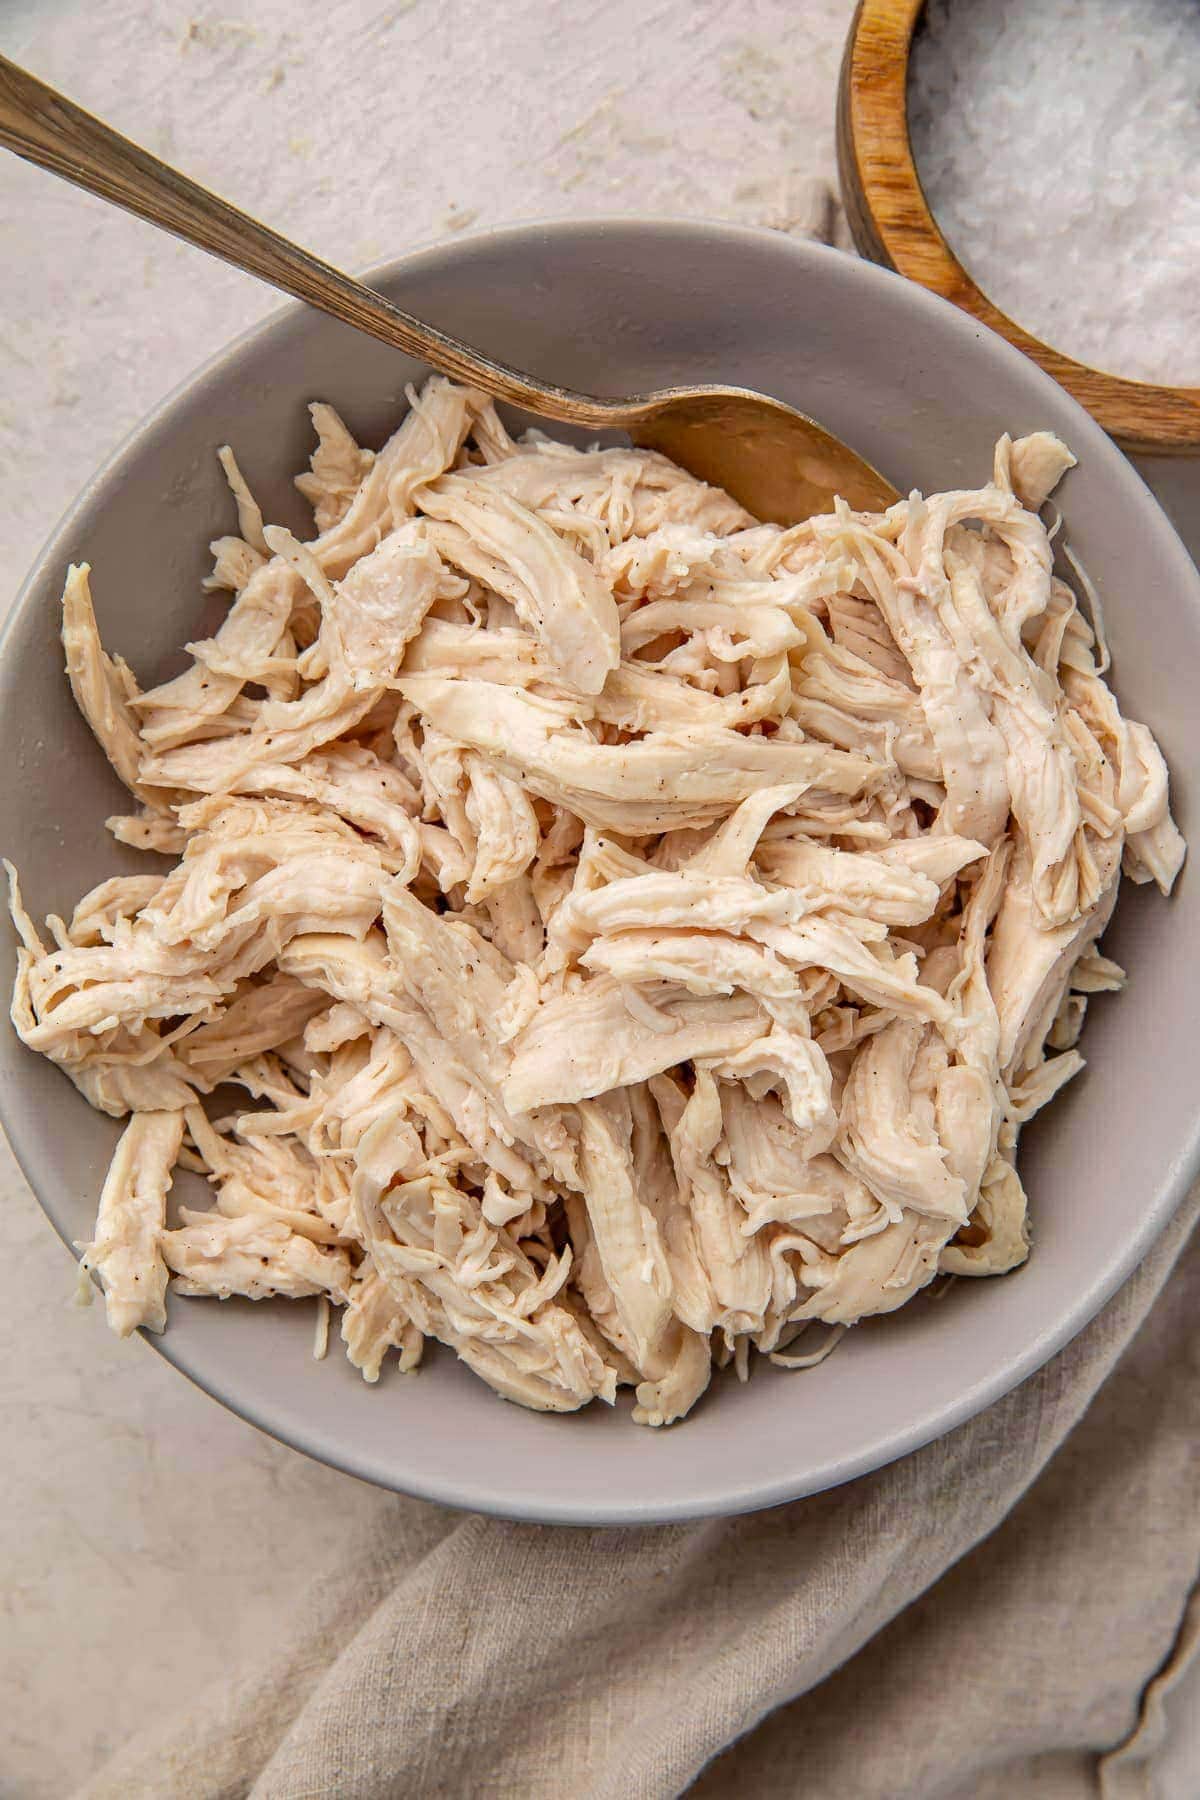 A light grey bowl holding large pieces of juicy shredded chicken with a utensil.